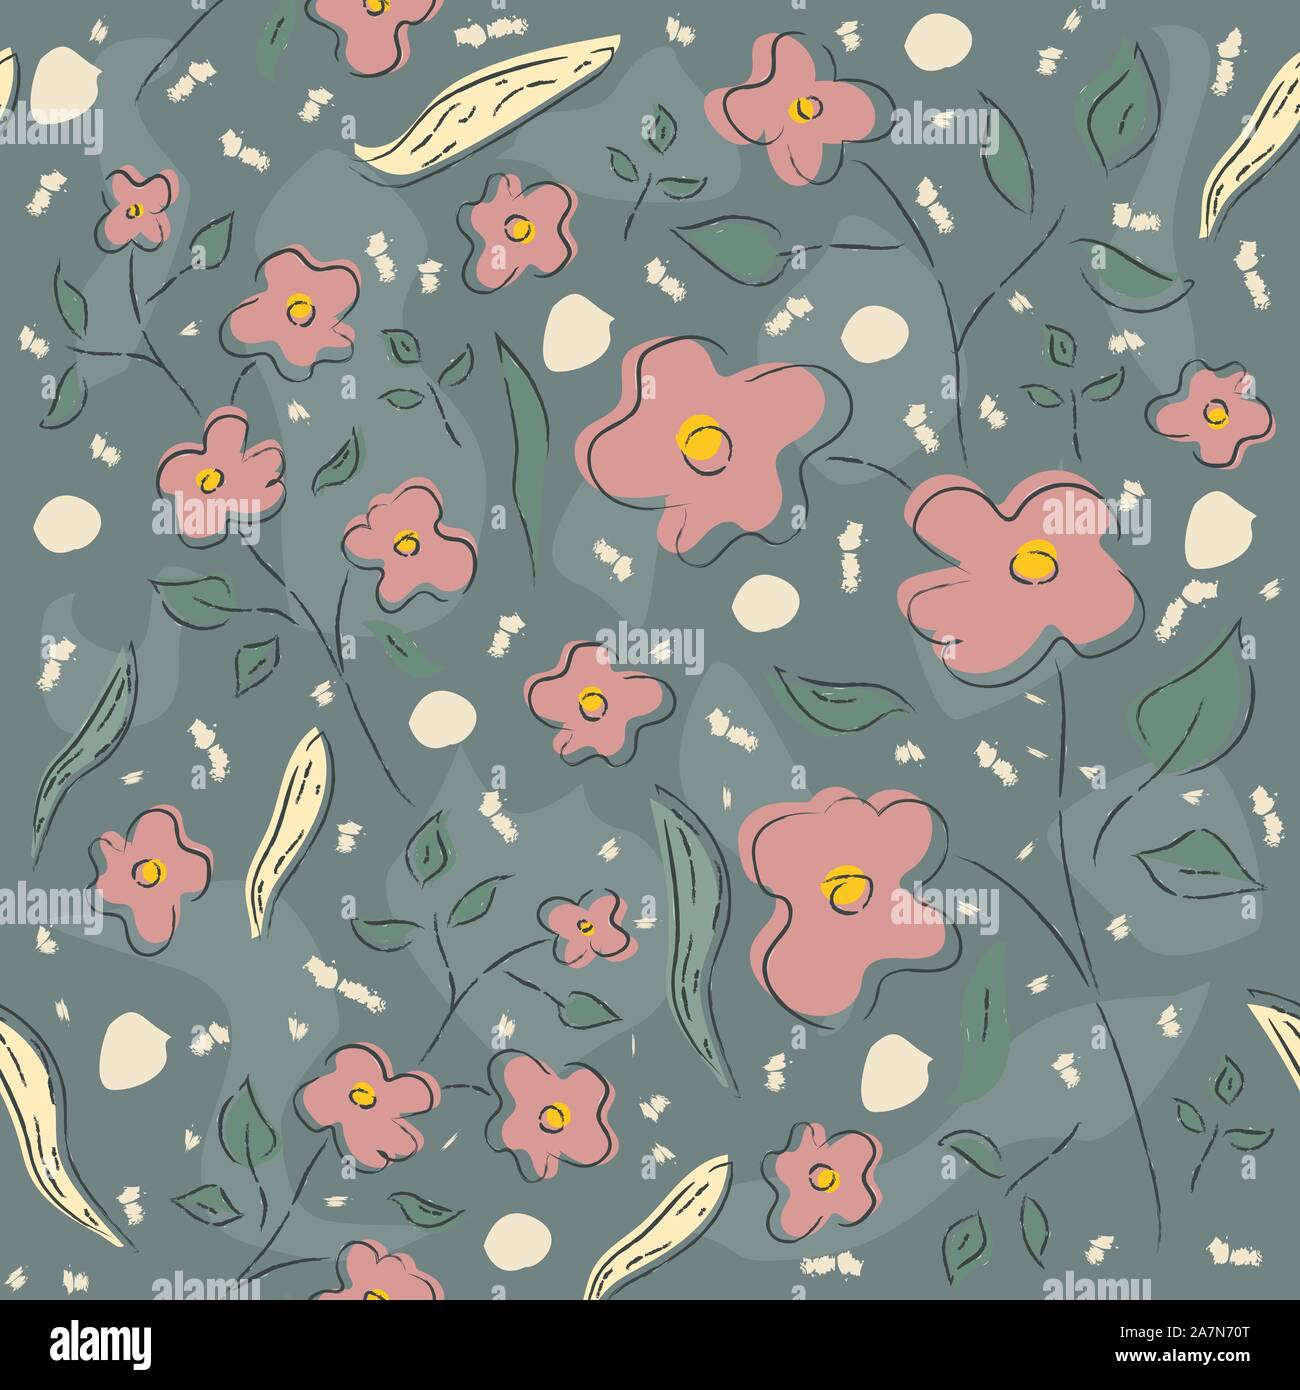 Floral and doodle Seamless Pattern. For backgrounds, wallpapers, fabric, prints, textiles, wrapping, cards, swatches, t-shirts, scrapbooks, blankets, Stock Vector